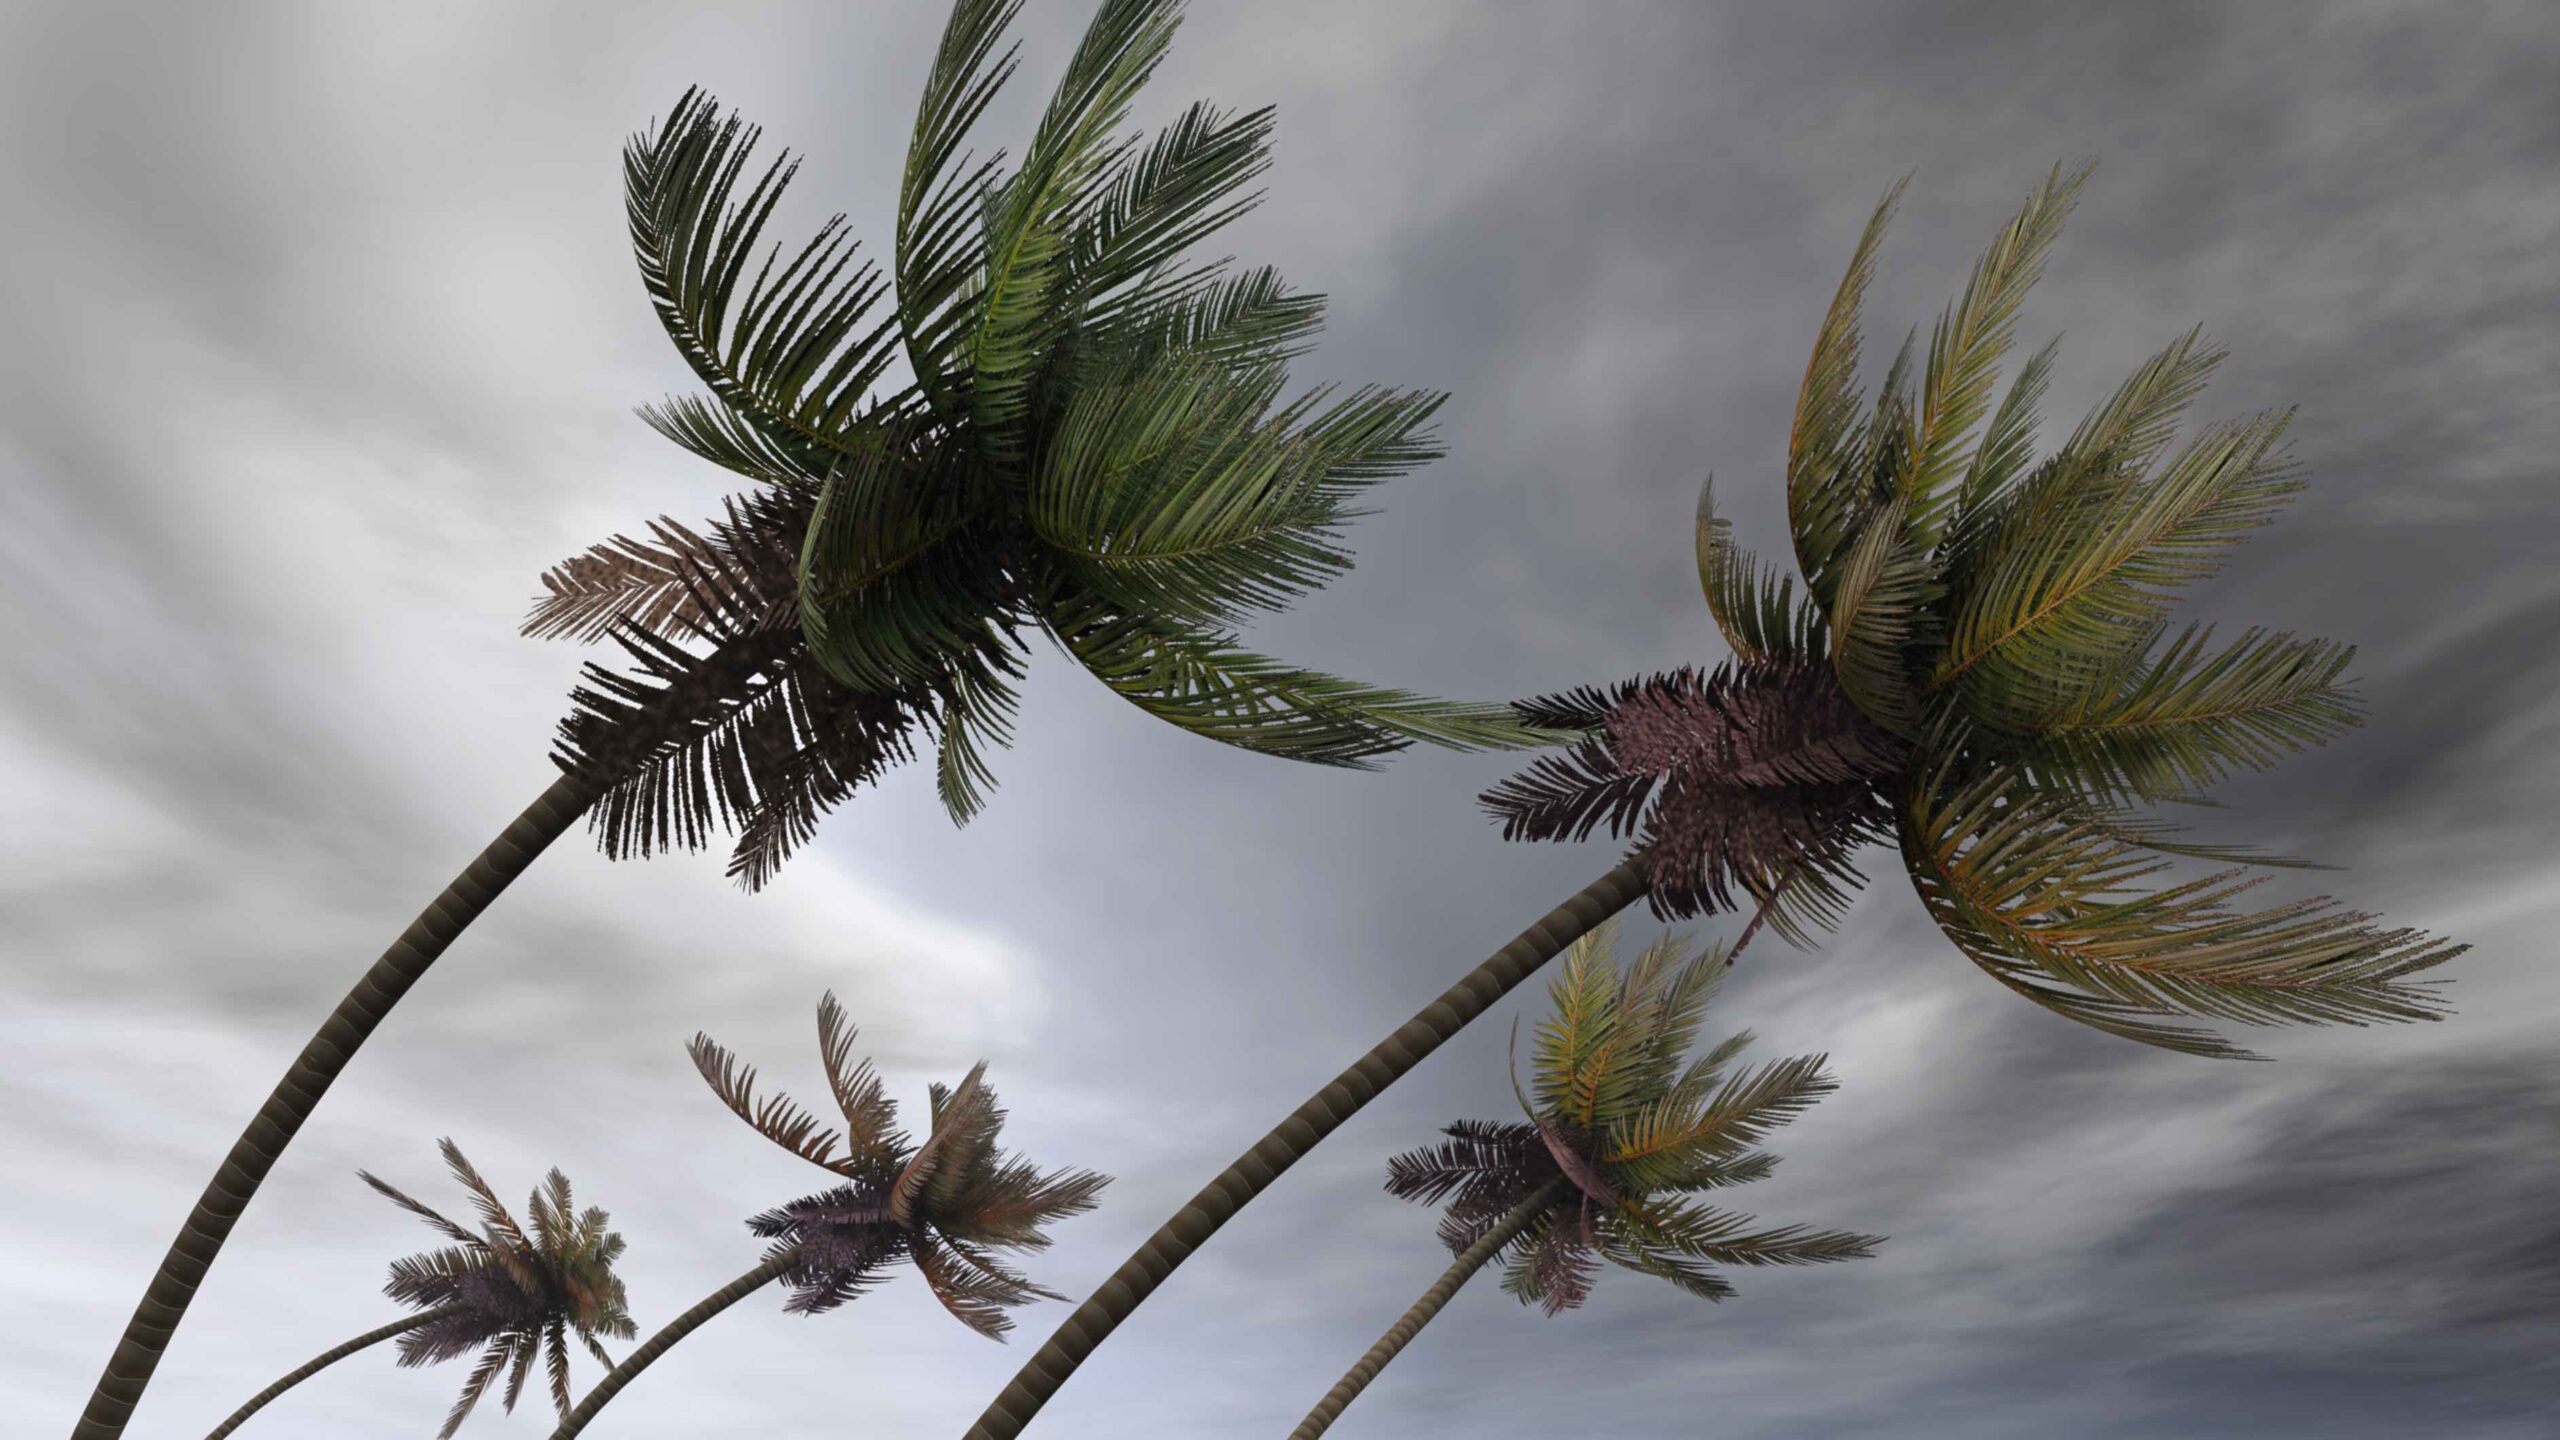 Palm trees blowing in the wind.